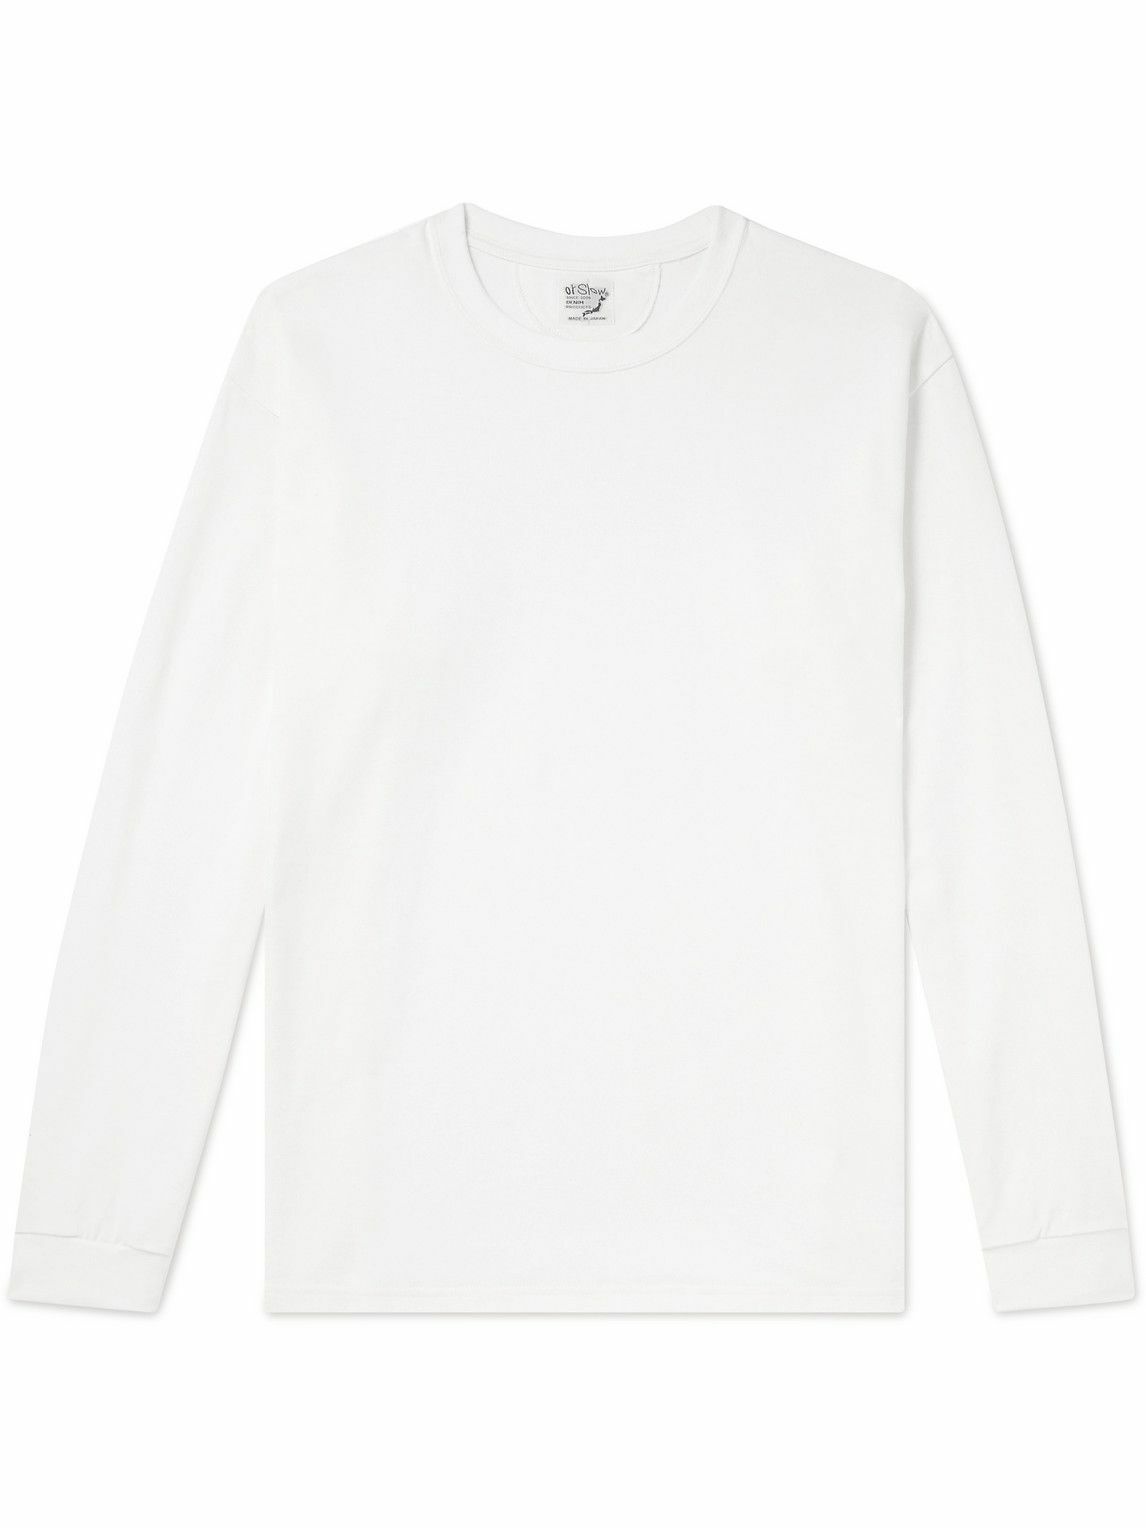 OrSlow - Cotton-Jersey T-Shirt - White orSlow